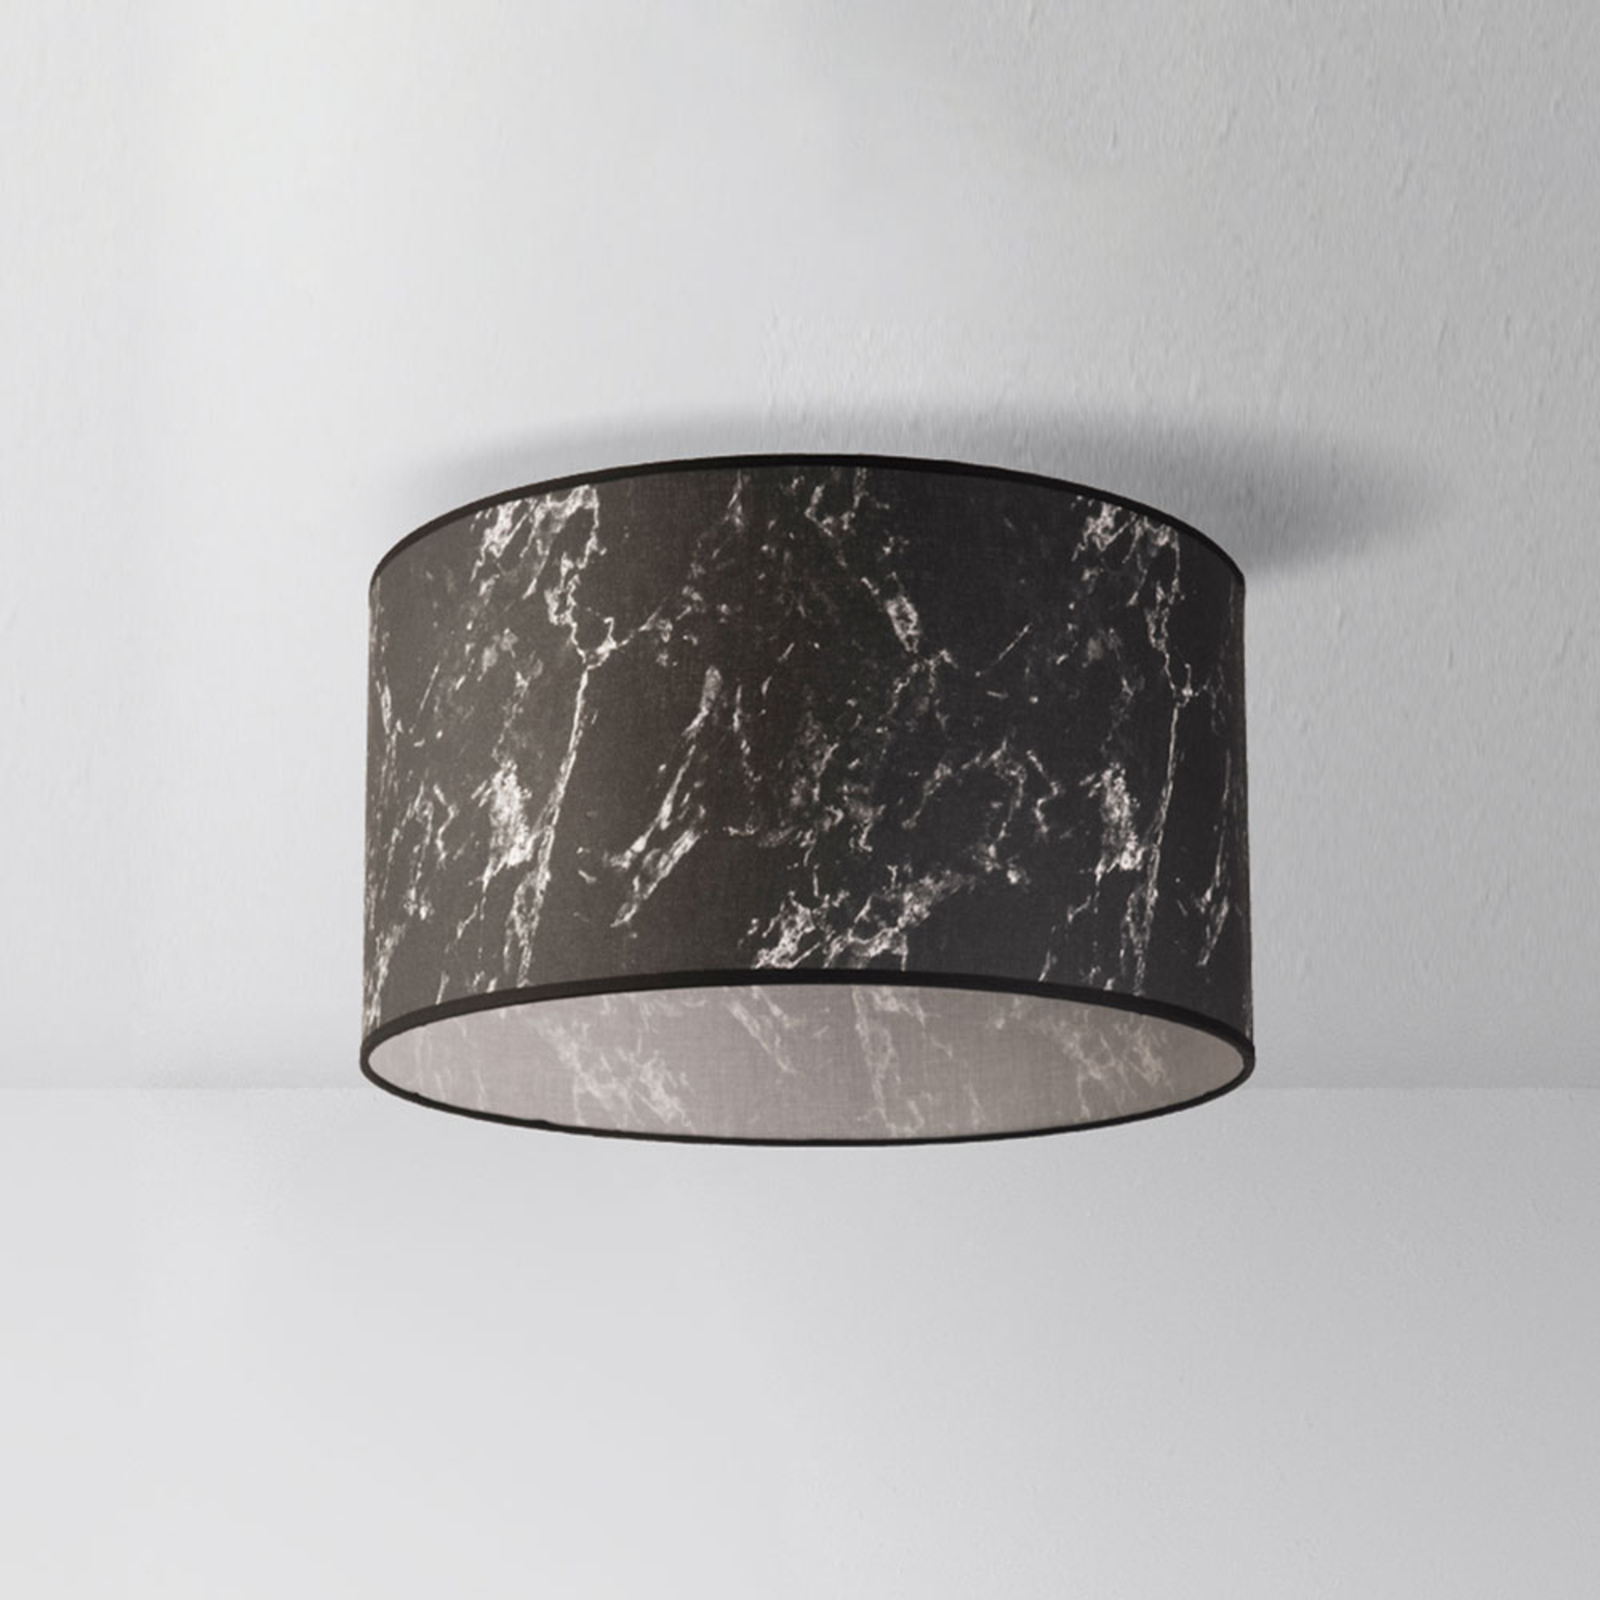 Marble ceiling light, marbled black